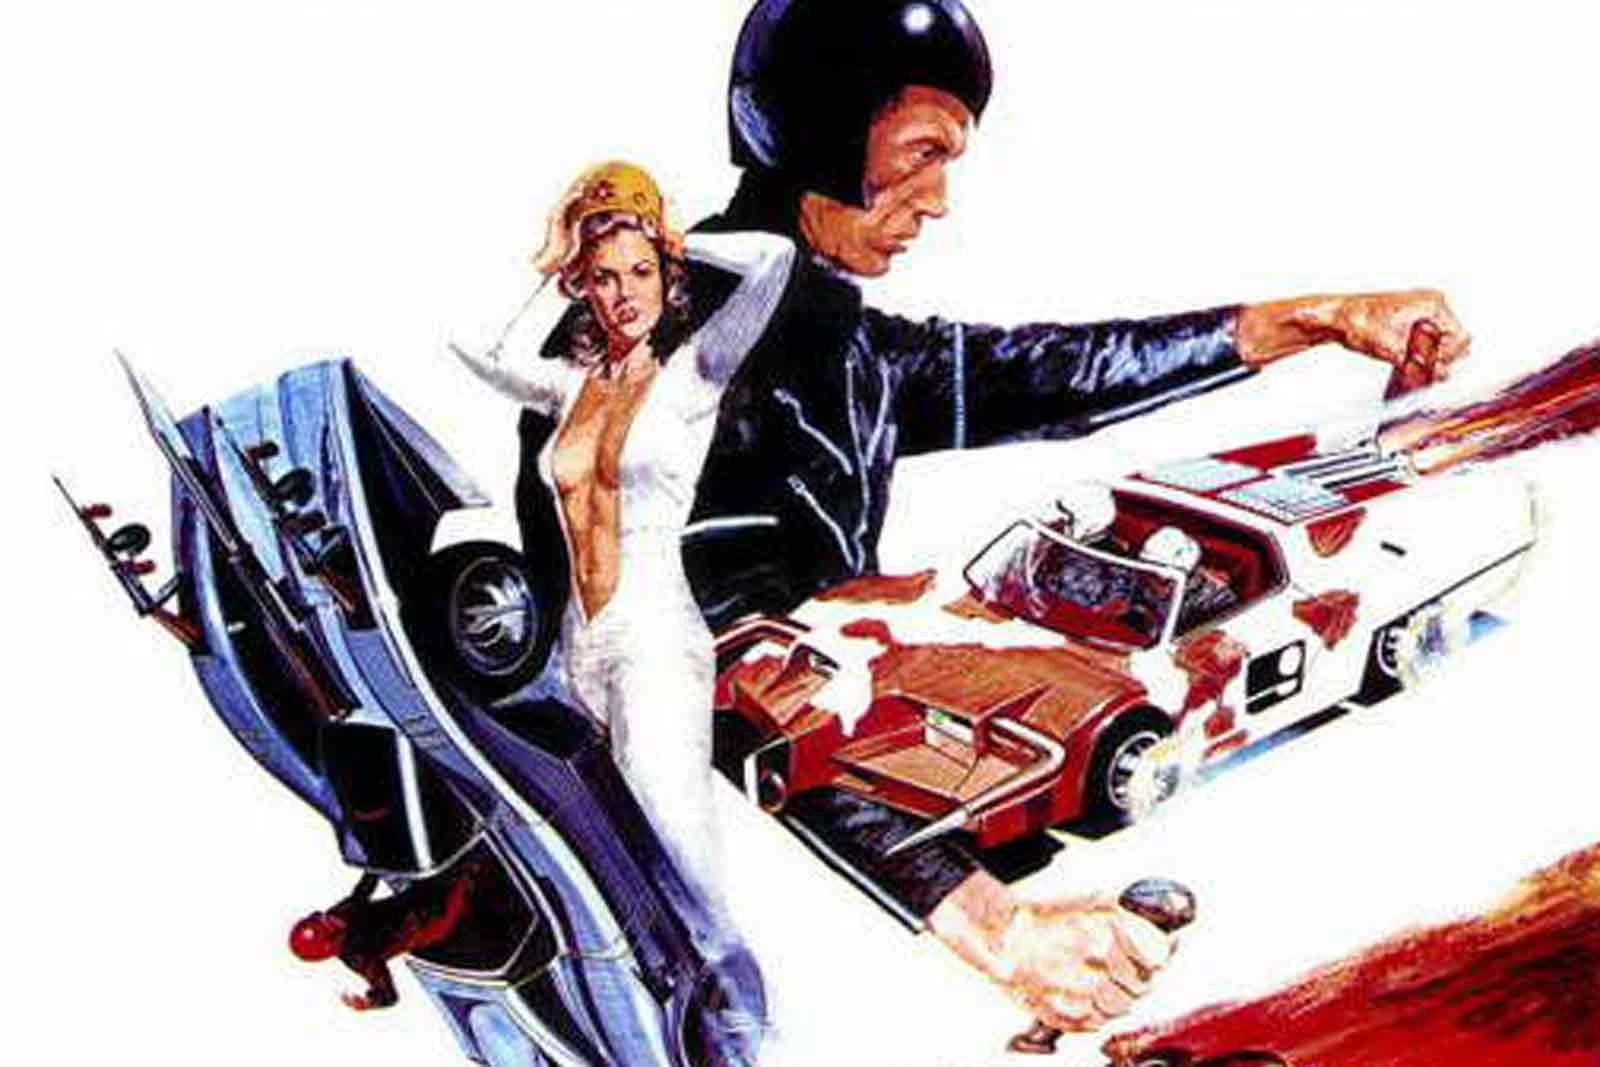 45 Years Ago Death Race 00 Sets Standard For Sci Fi Dystopia